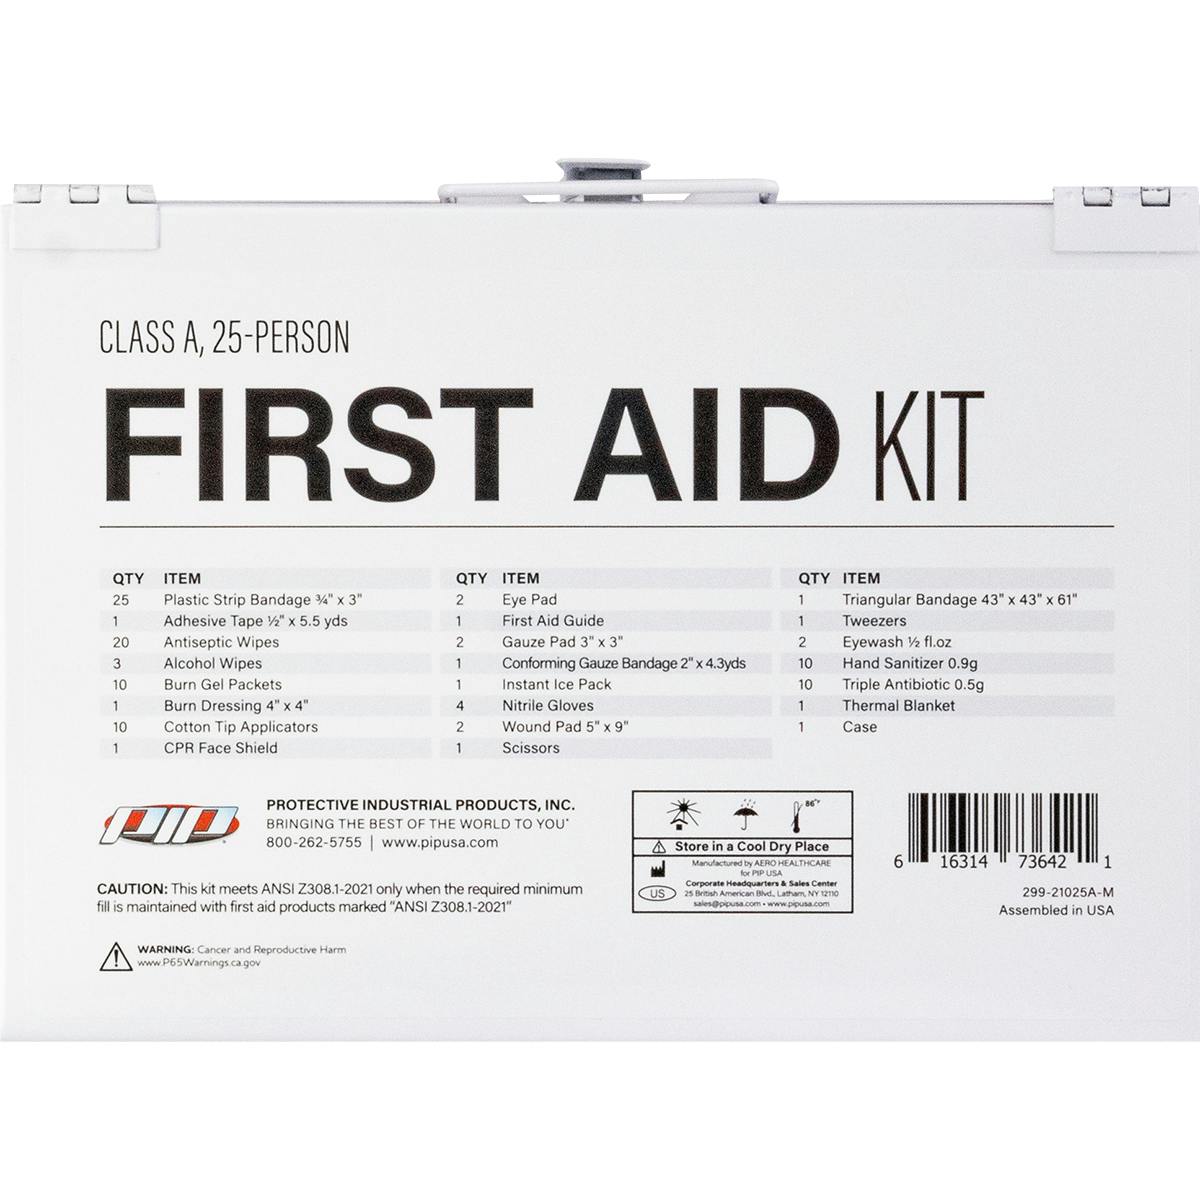 ANSI Class A Waterproof First Aid Kit - 25 Person, White (299-21025A-M) - KIT_0